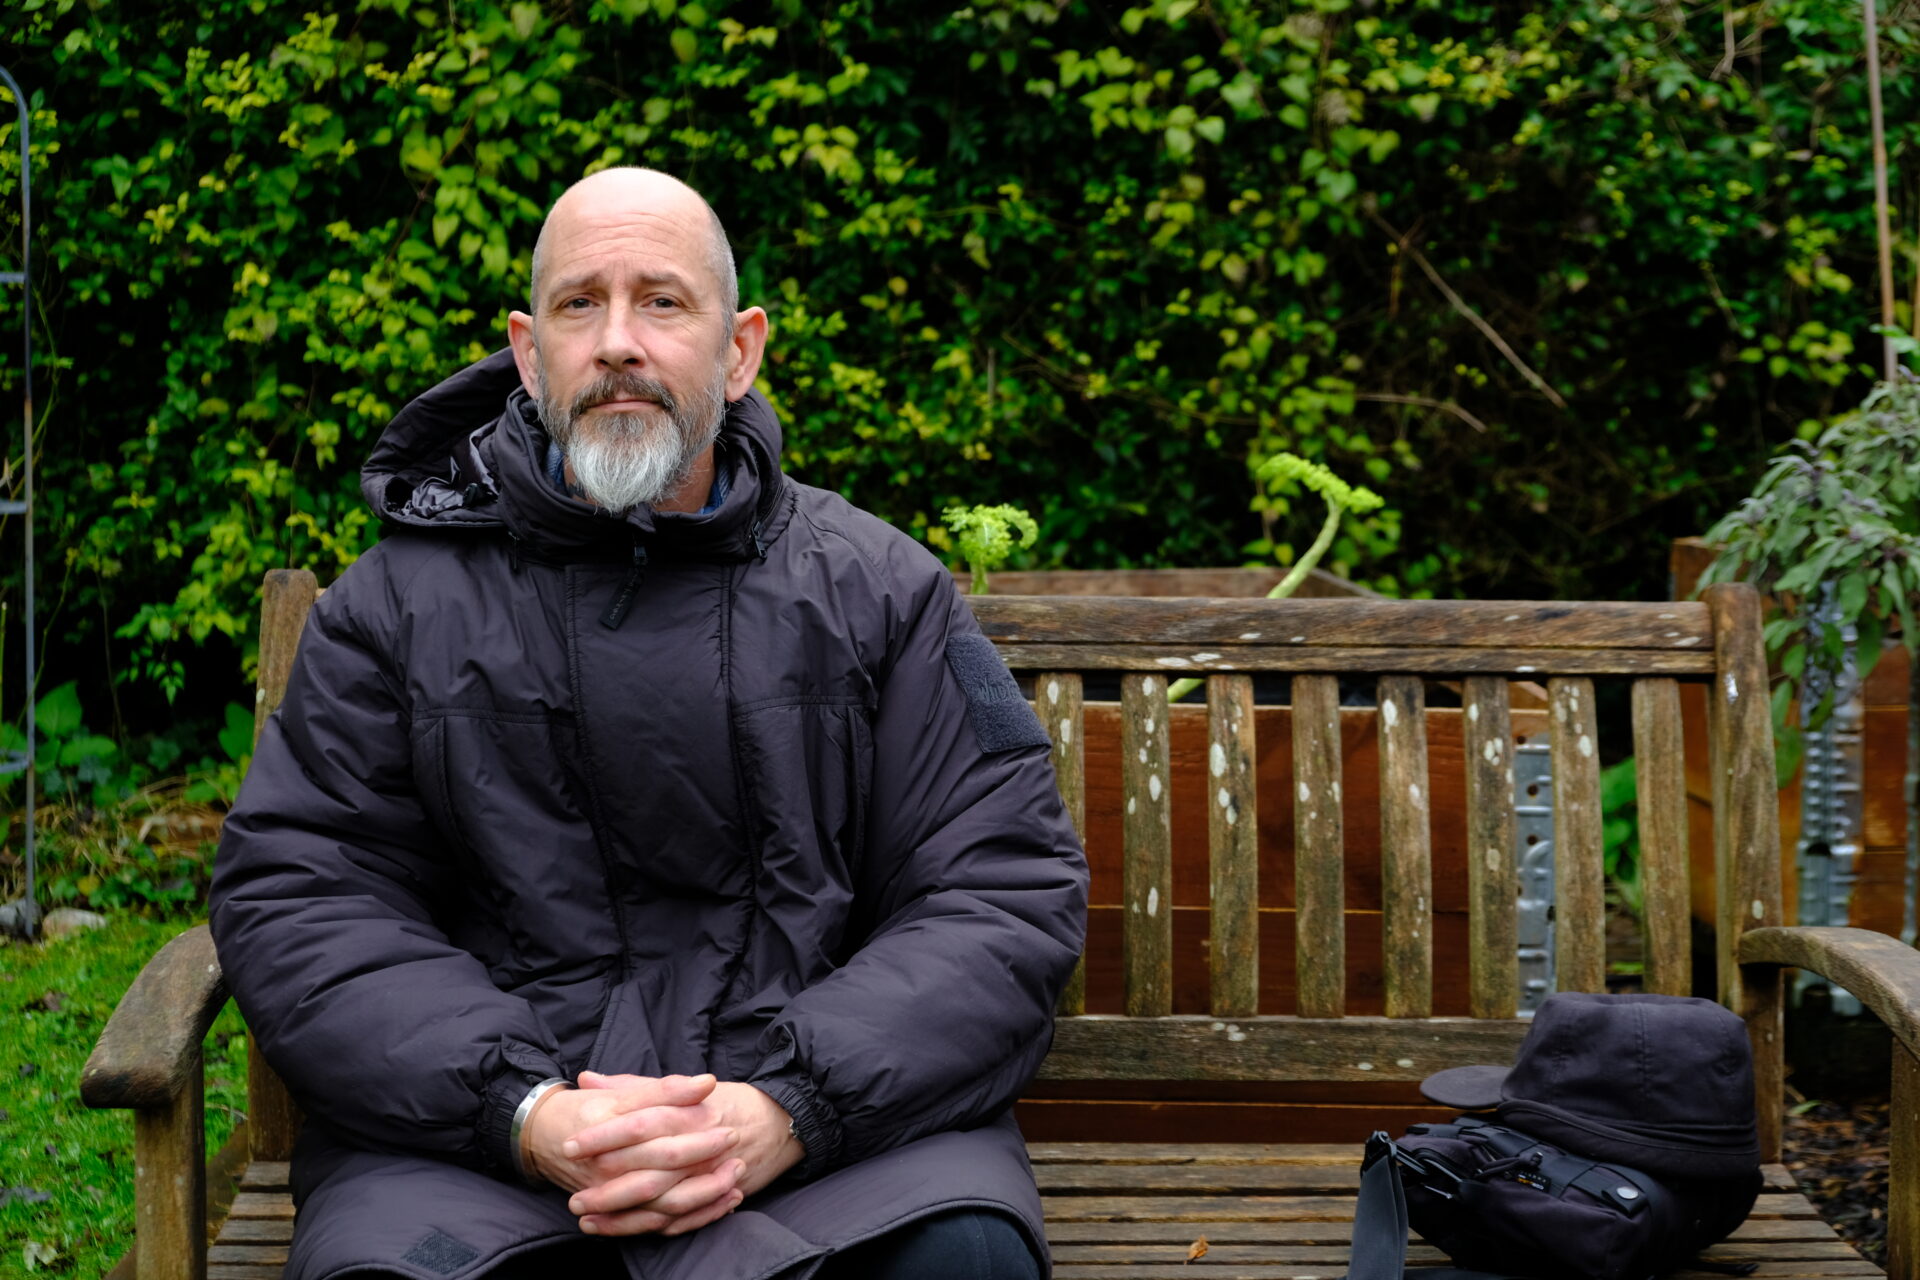 A white man with a smooth head and a grey beard is sitting on a garden bench. He is dressed in black and has a black bag next to him.